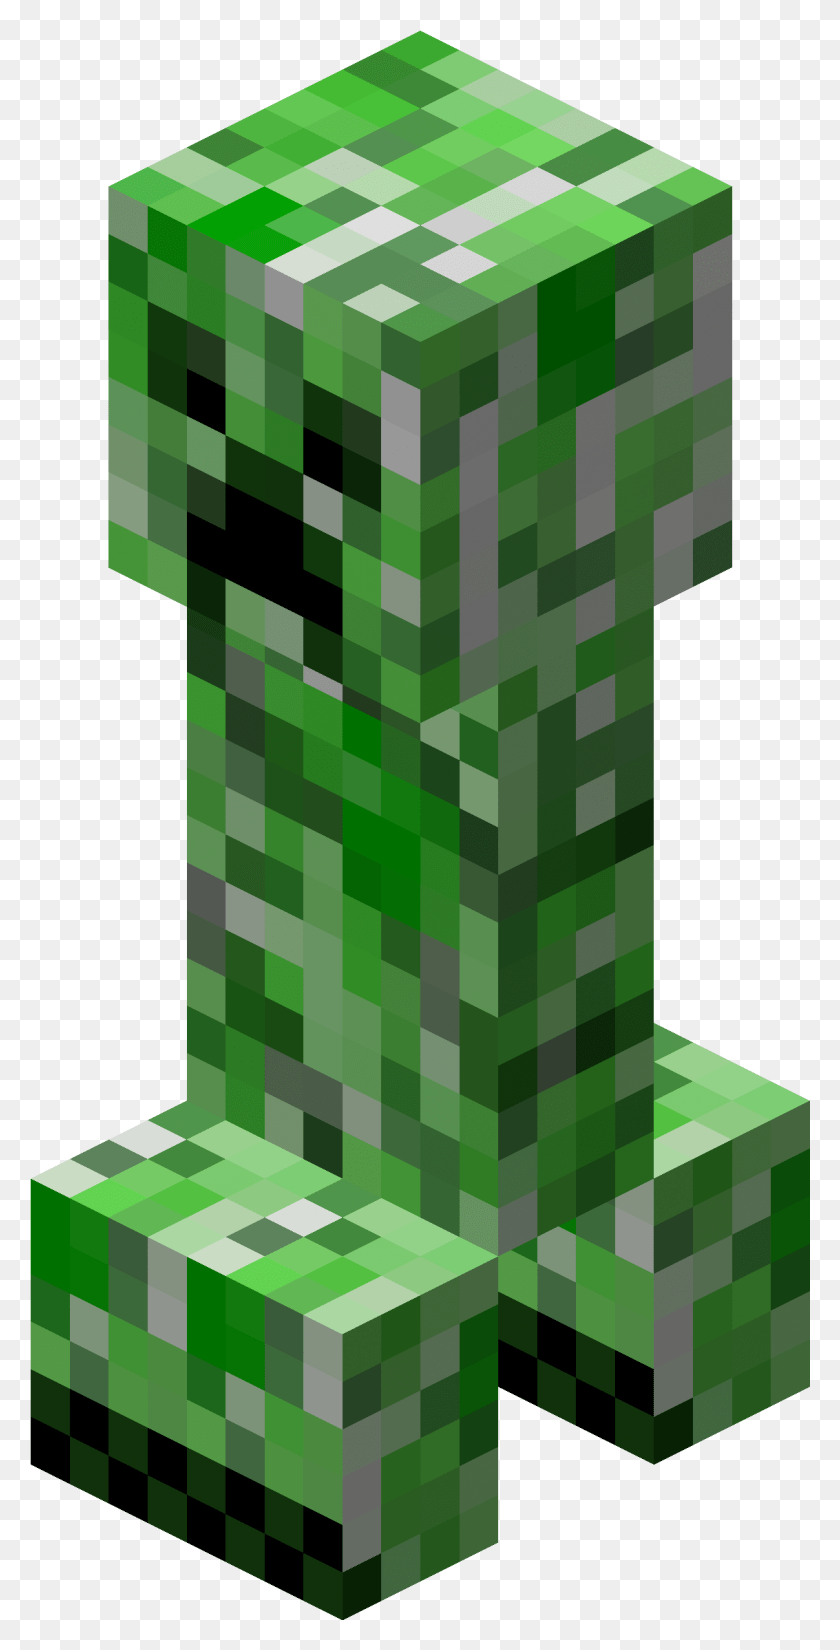 Minecraft Creeper Mob Video Game Skeleton Minecraft Creeper Transparent Background Rug Green Tree Hd Png Download Stunning Free Transparent Png Clipart Images Free Download